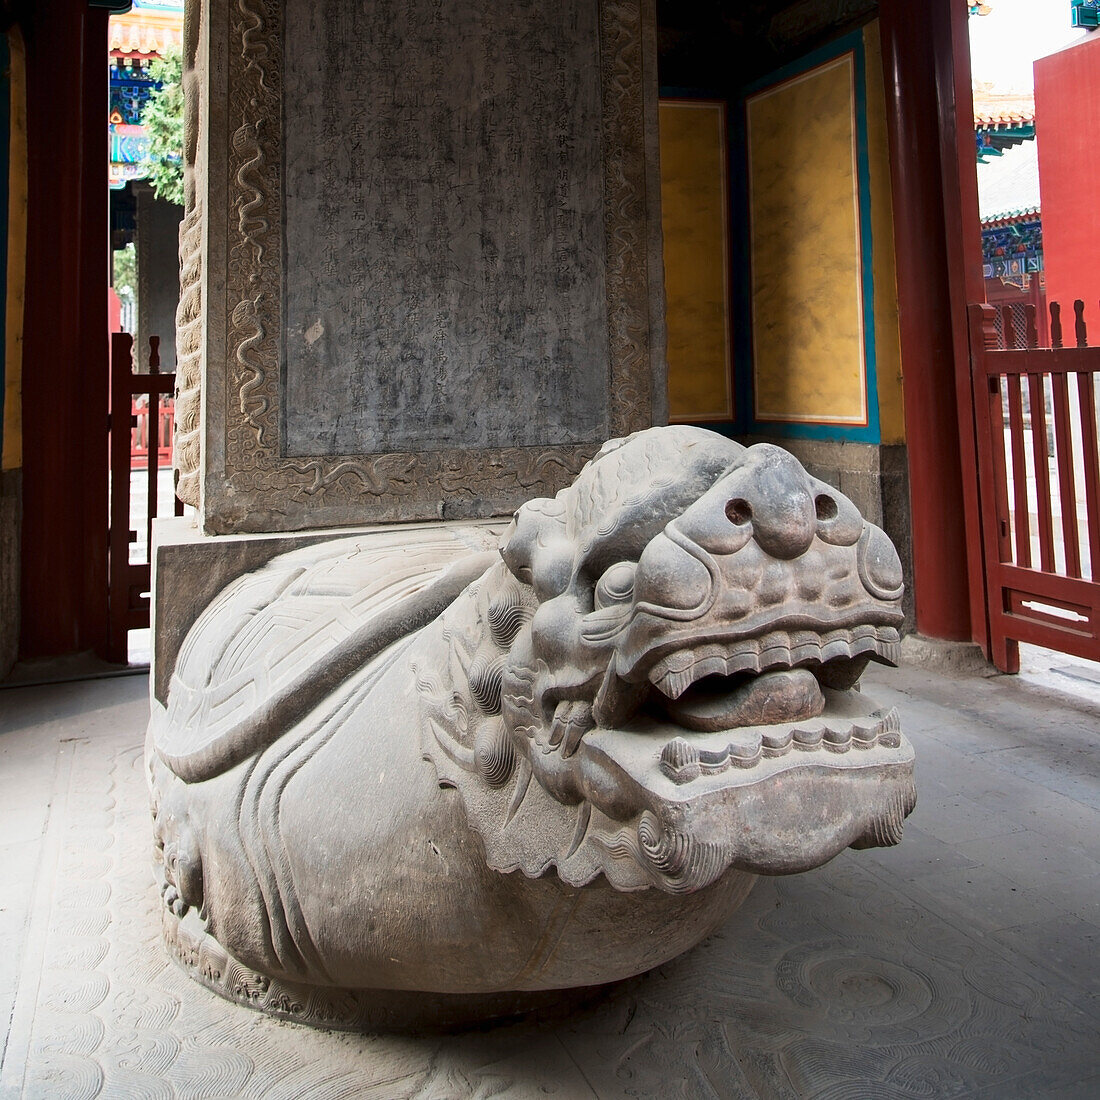 Statue Of Animal Likeness At Confucius Temple; Beijing, China